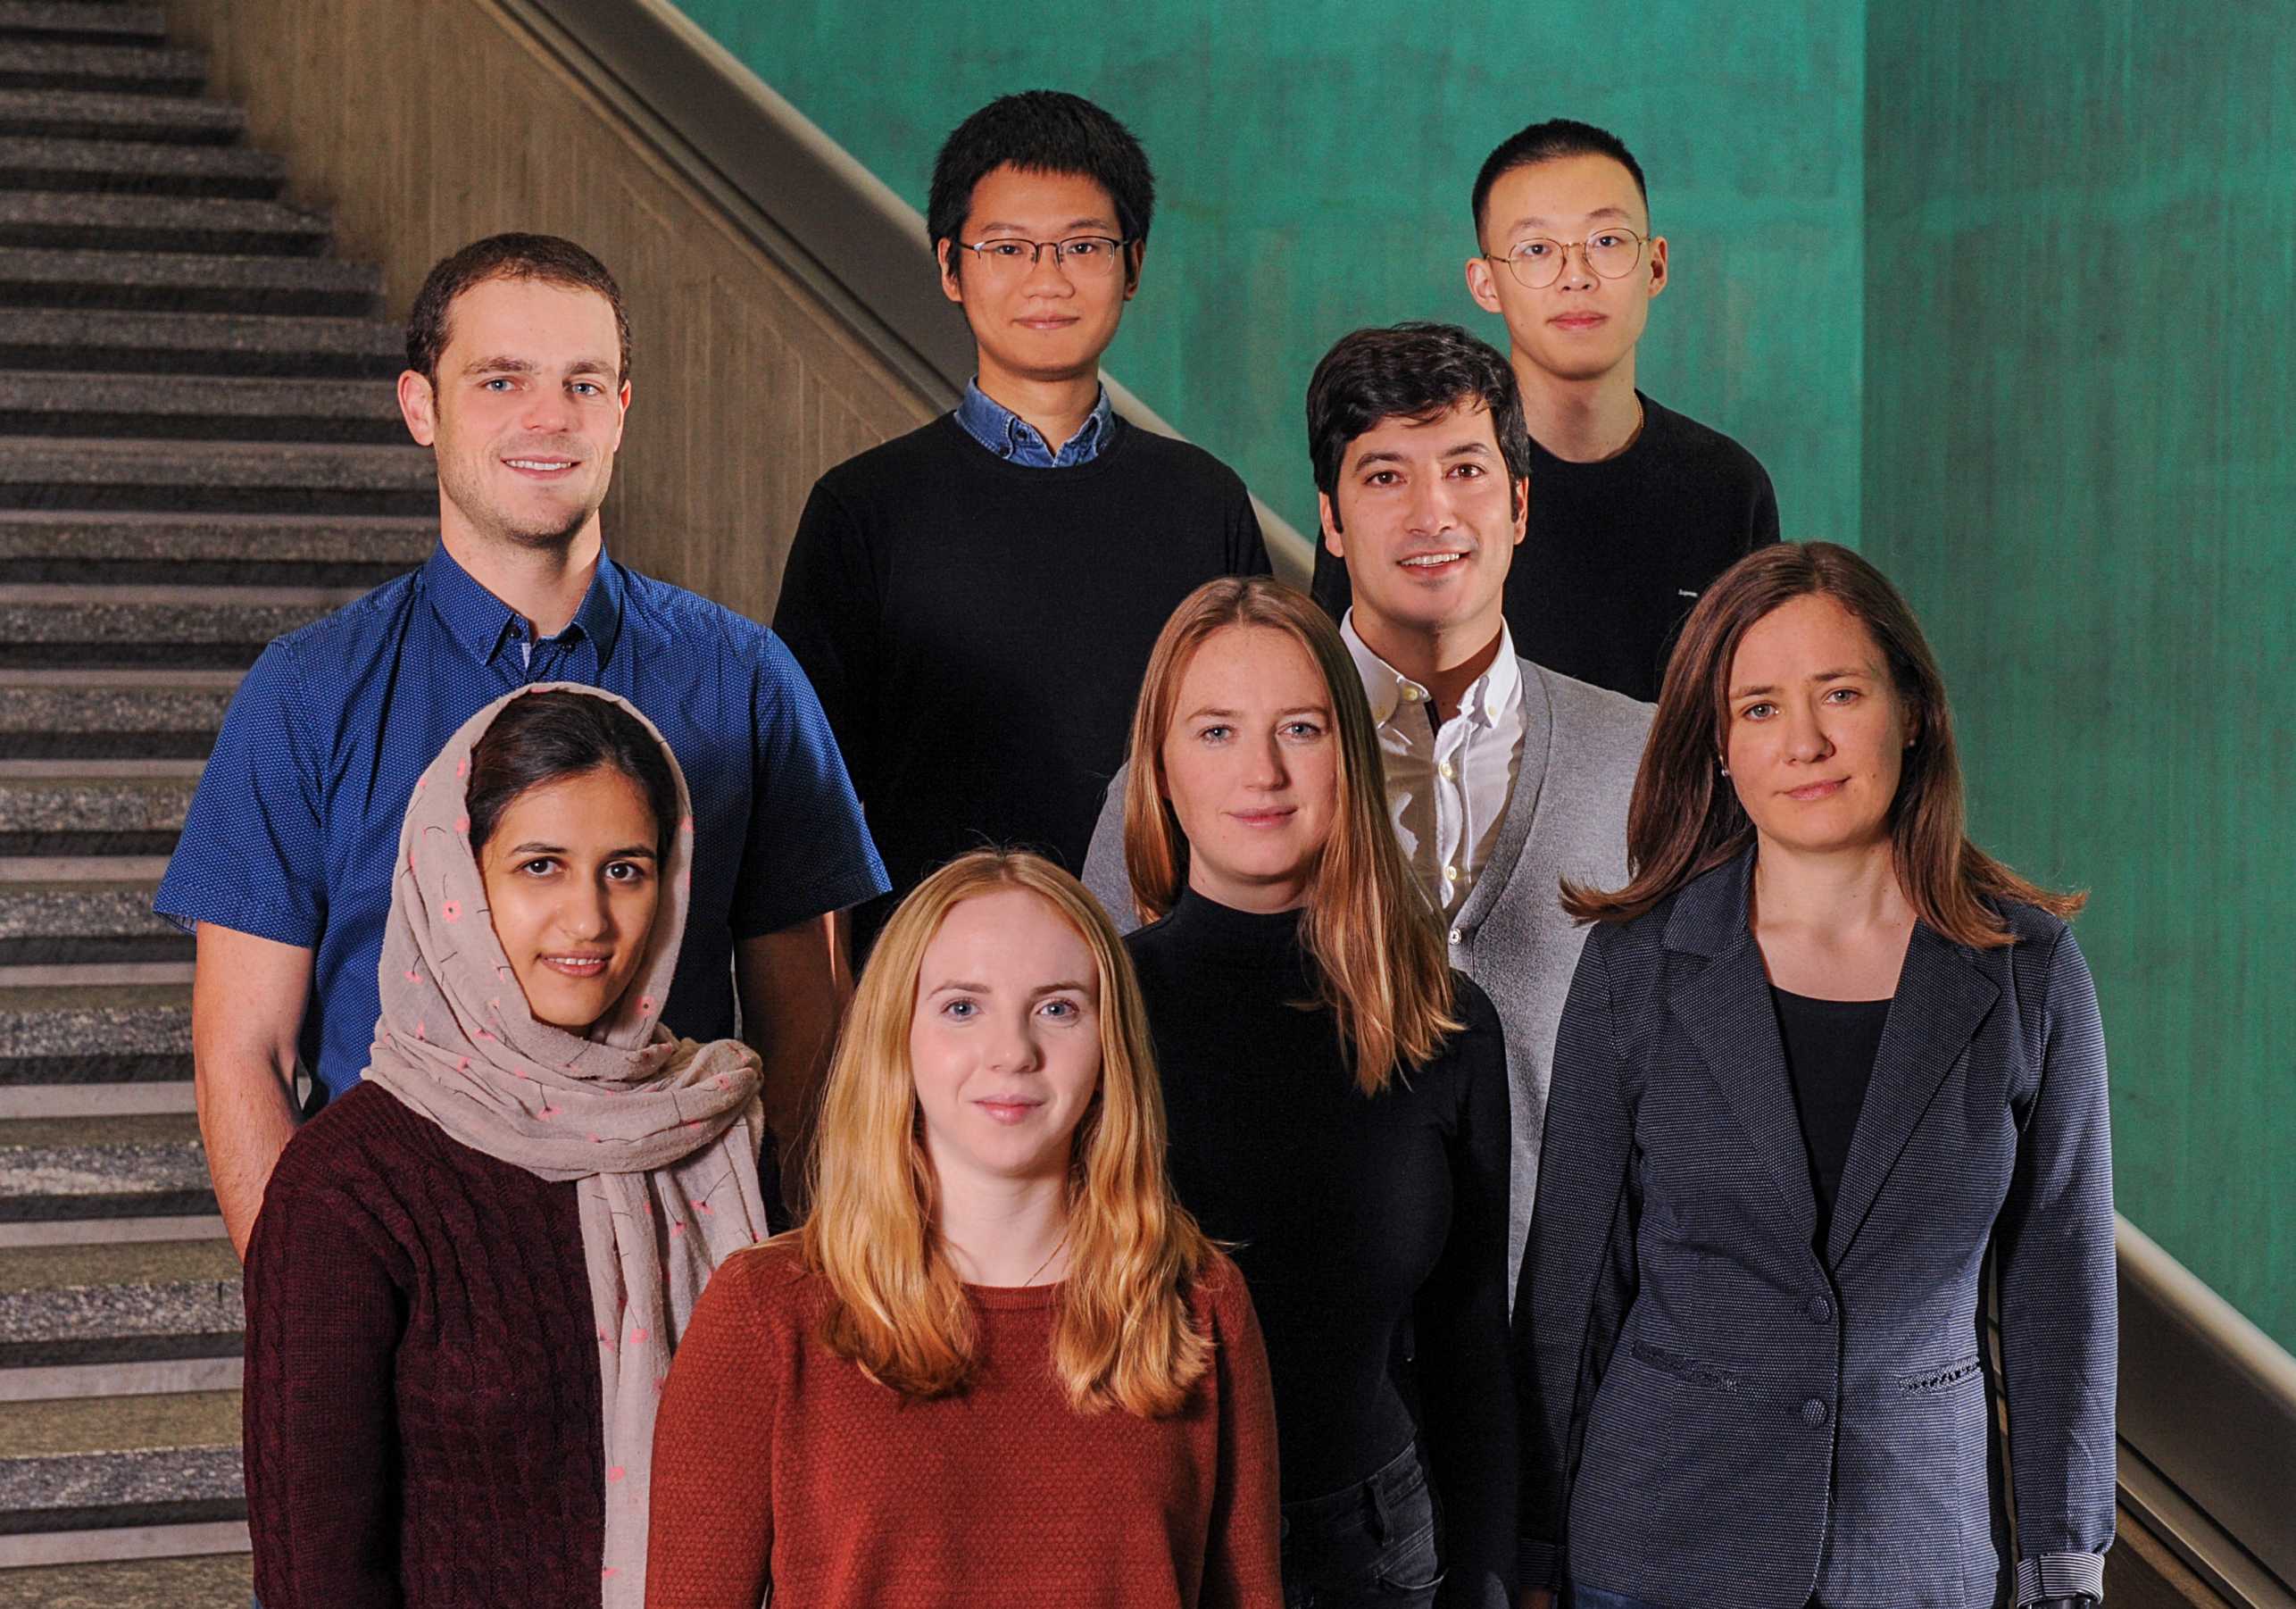 Group picture for Prof. Fink